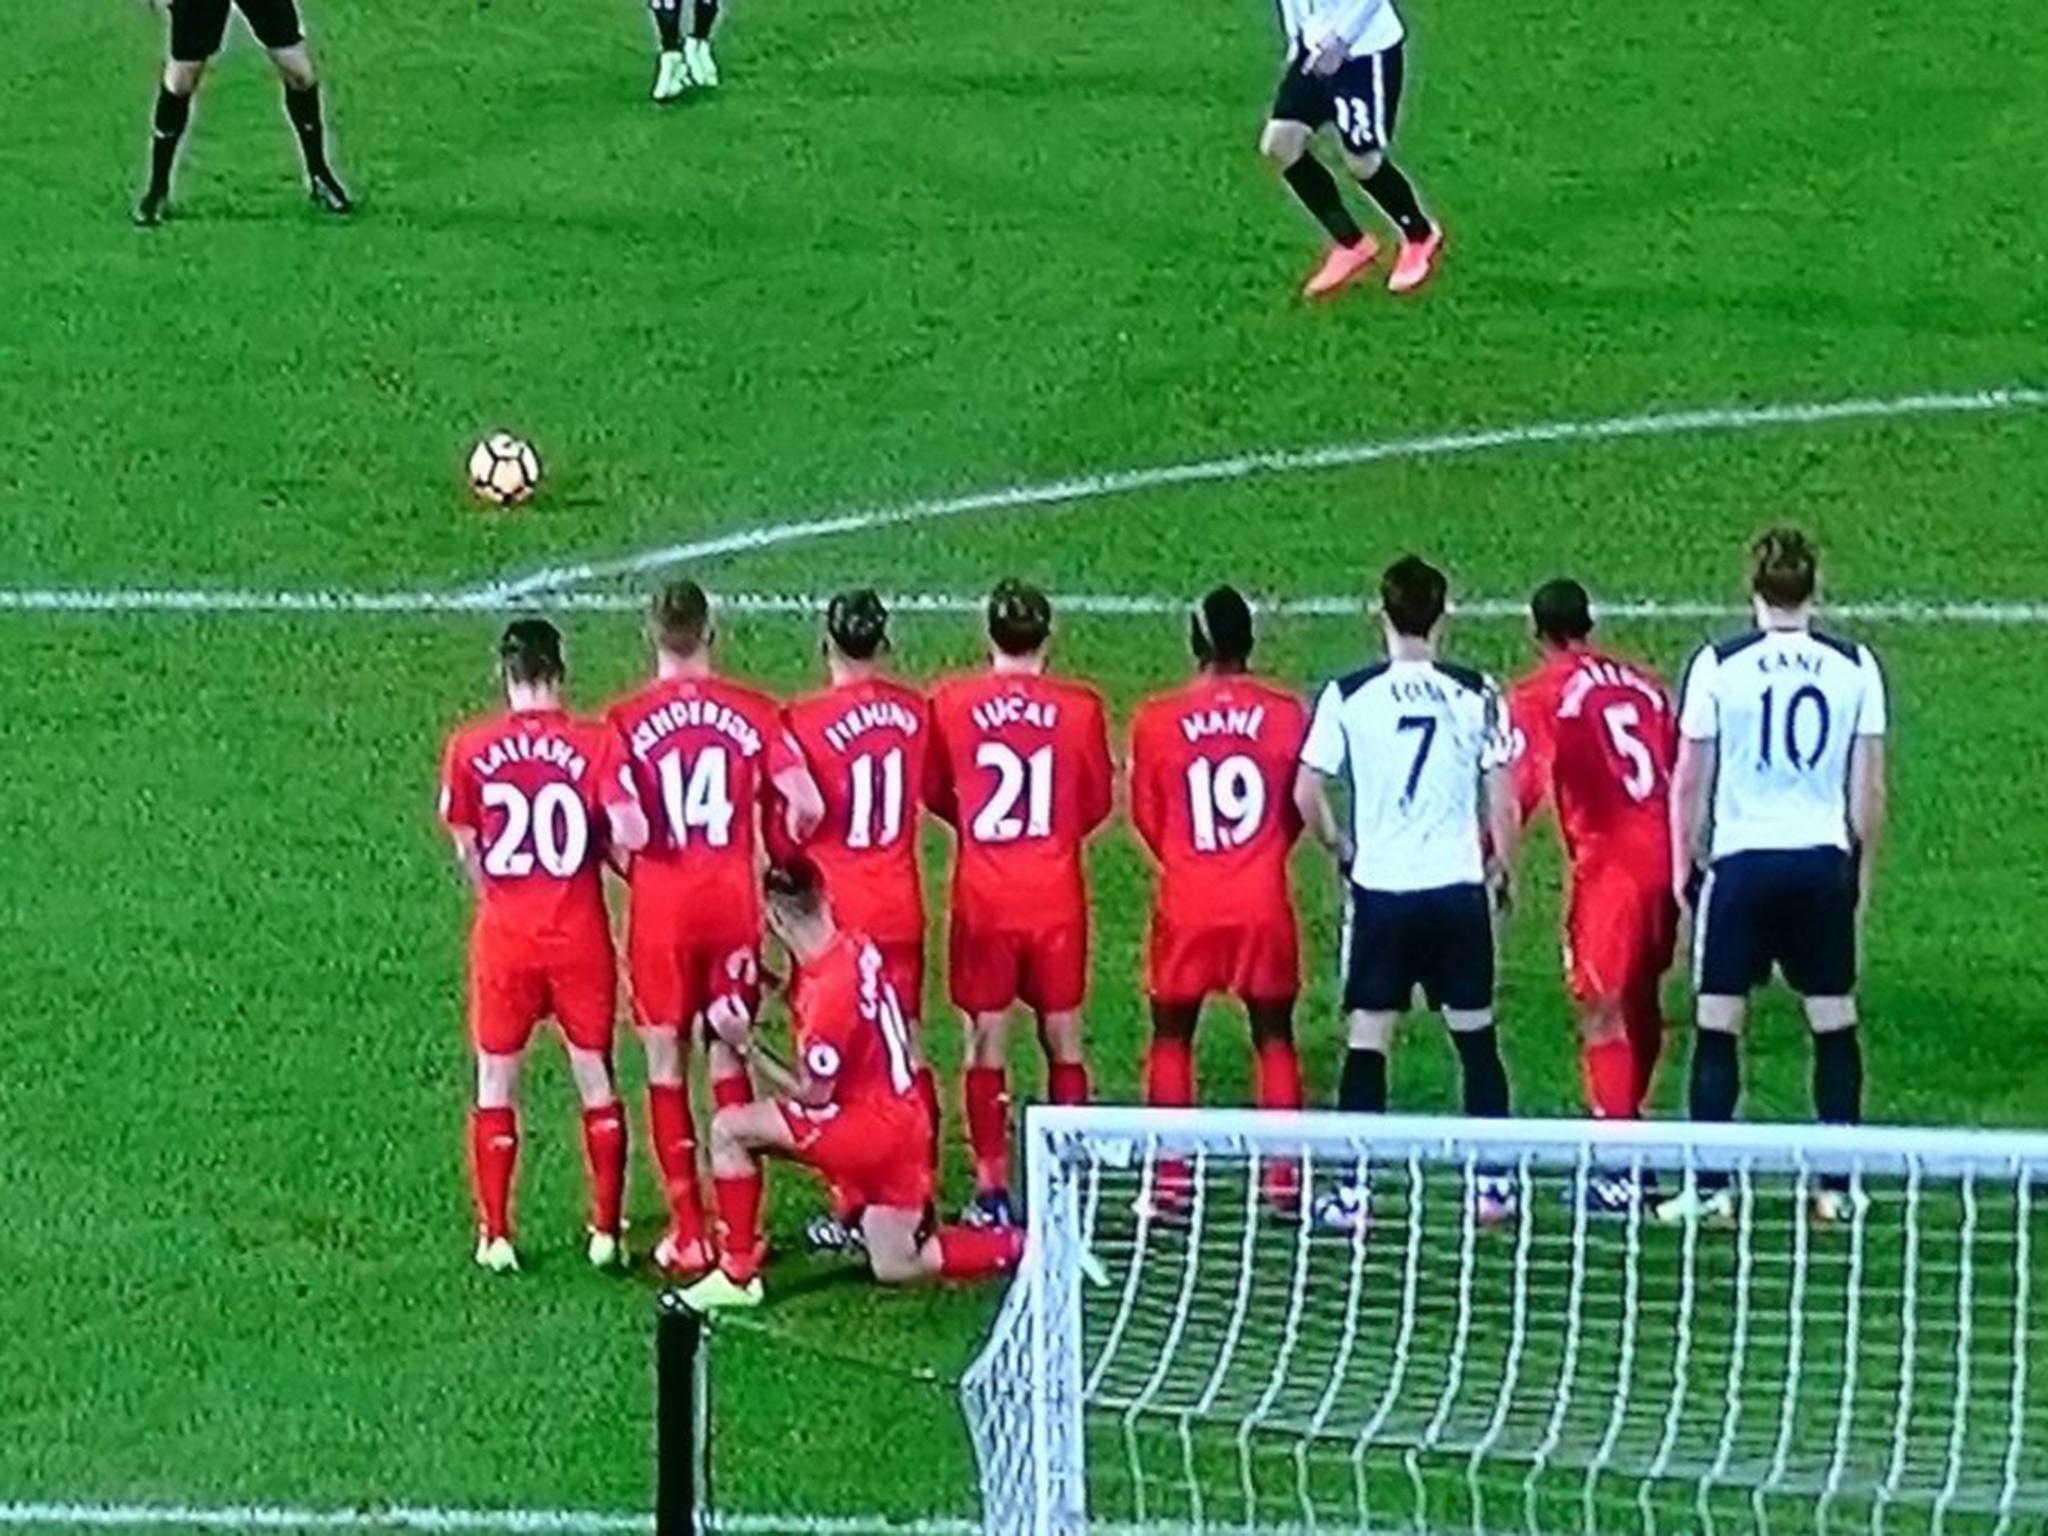 Philippe Coutinho was spotted kneeling behind the wall in order to prevent Christian Eriksen from shooting low